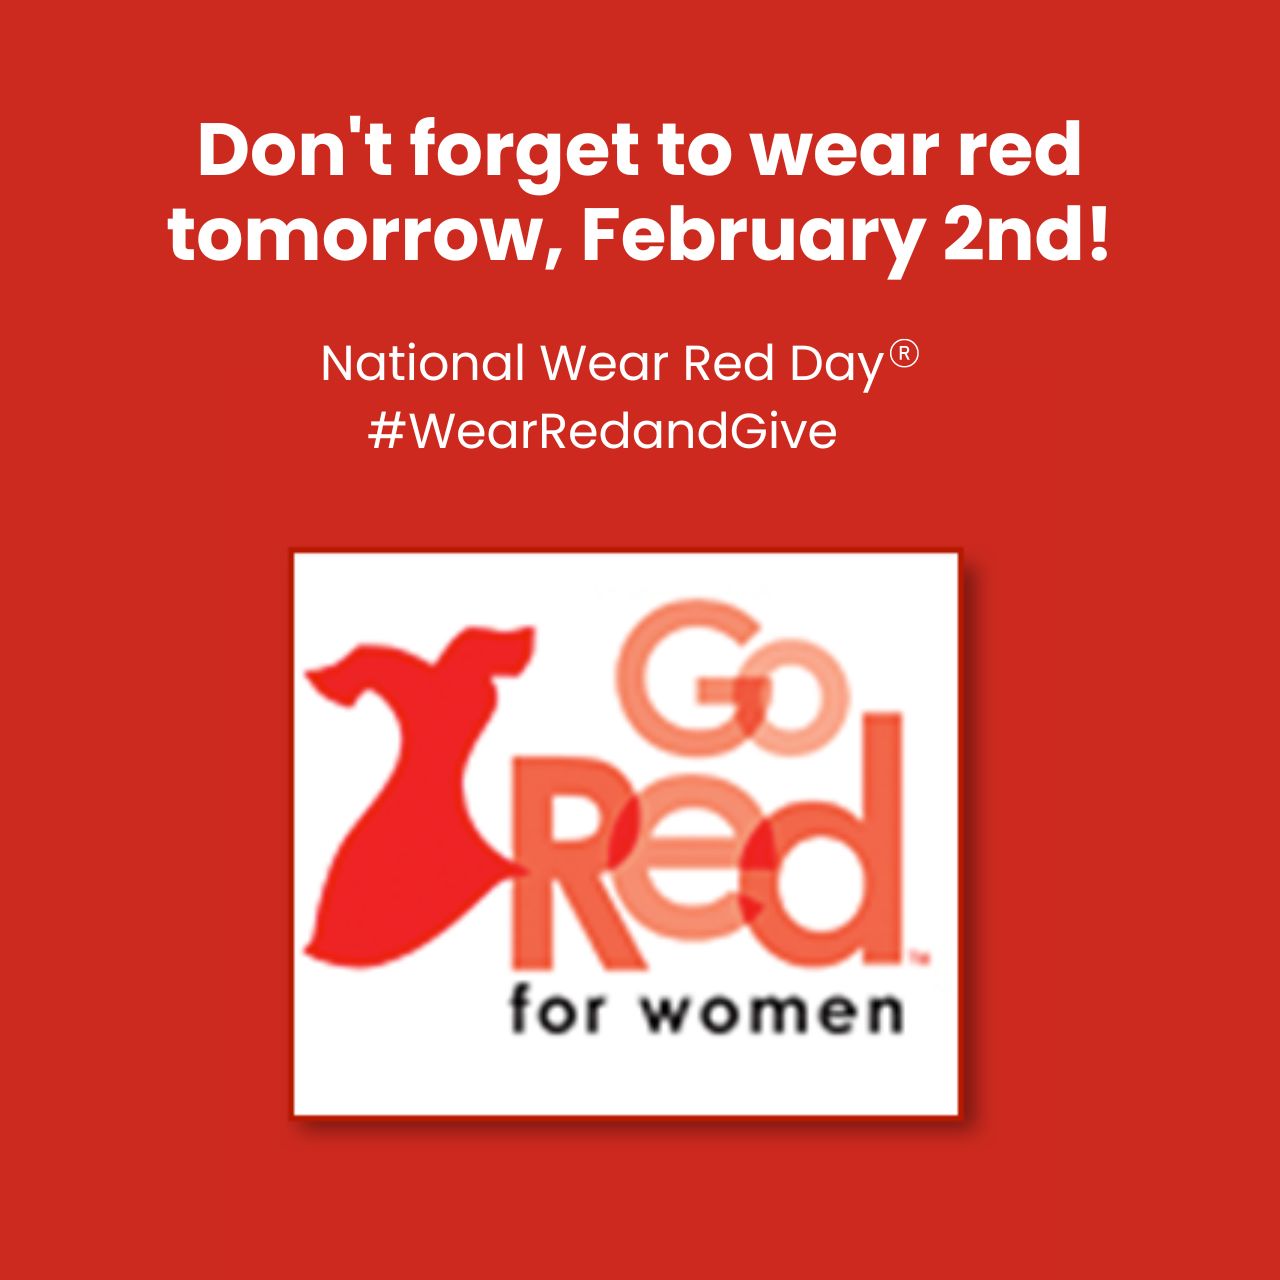 wear red for women event